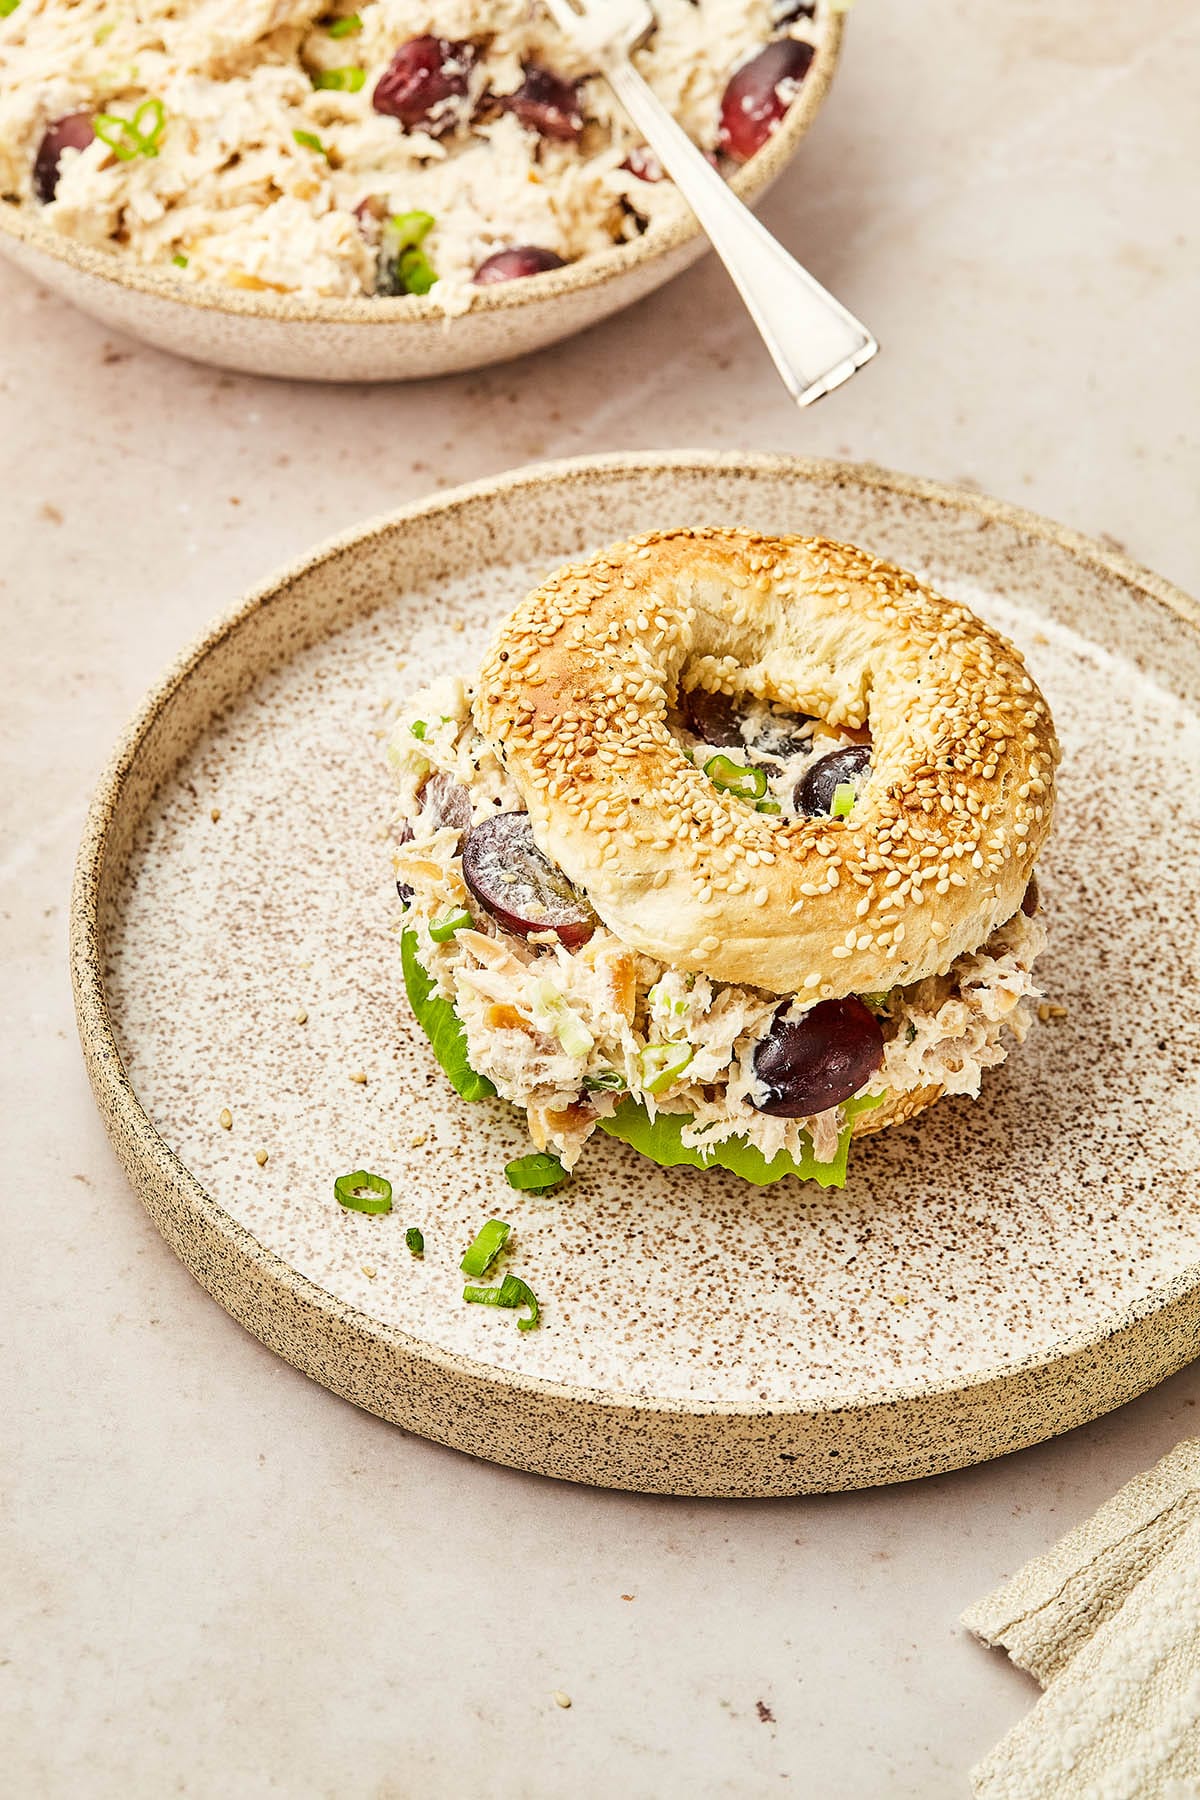 Chicken salad with grapes and almonds on a toasted sesame bagel.